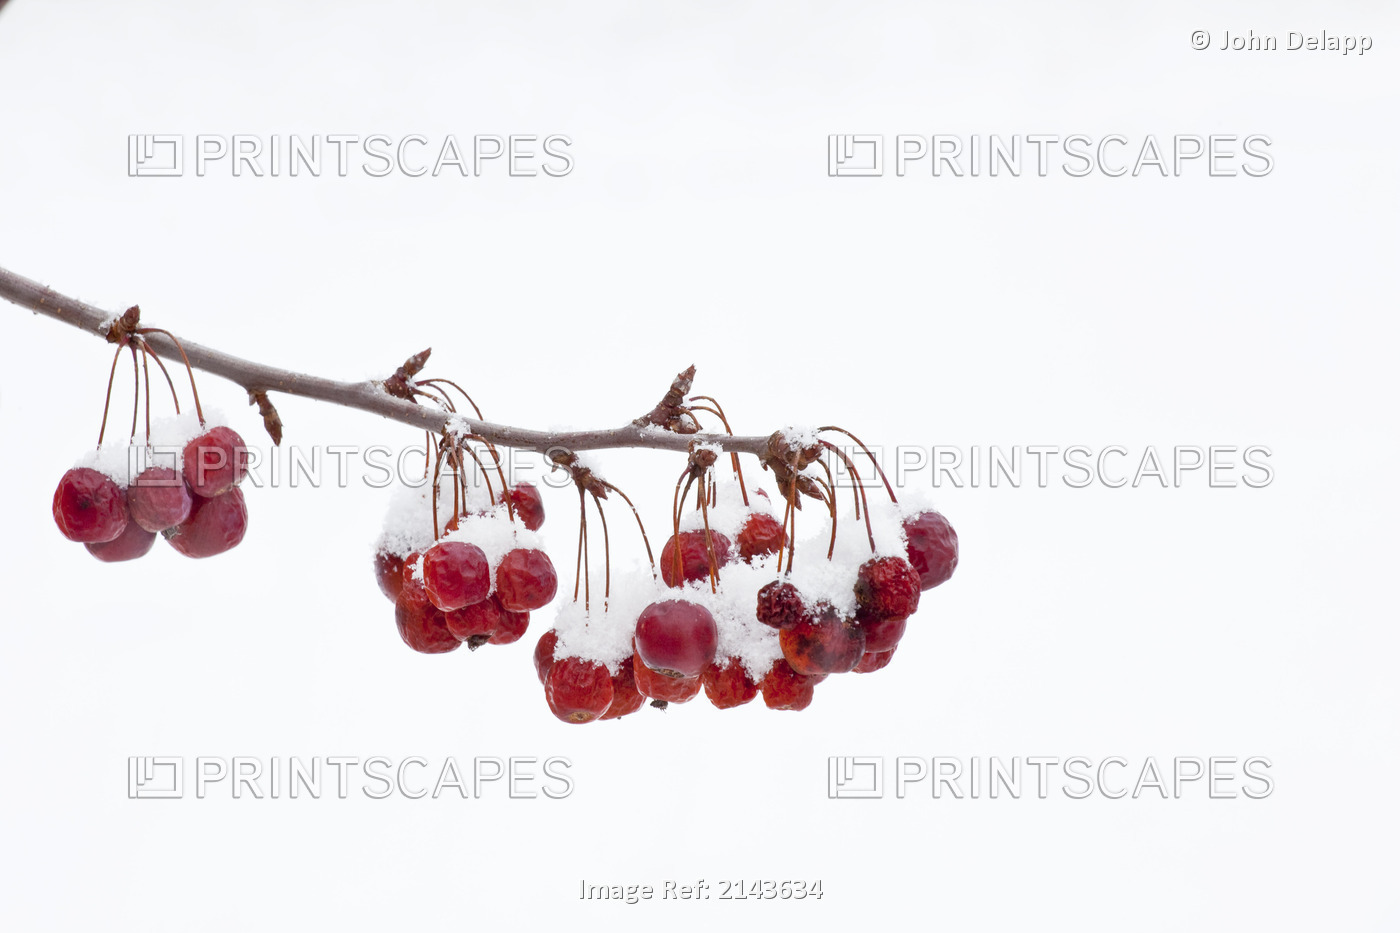 View Of Fresh Snow On Crab Apples Hanging From A Branch In Connecticut, Winter